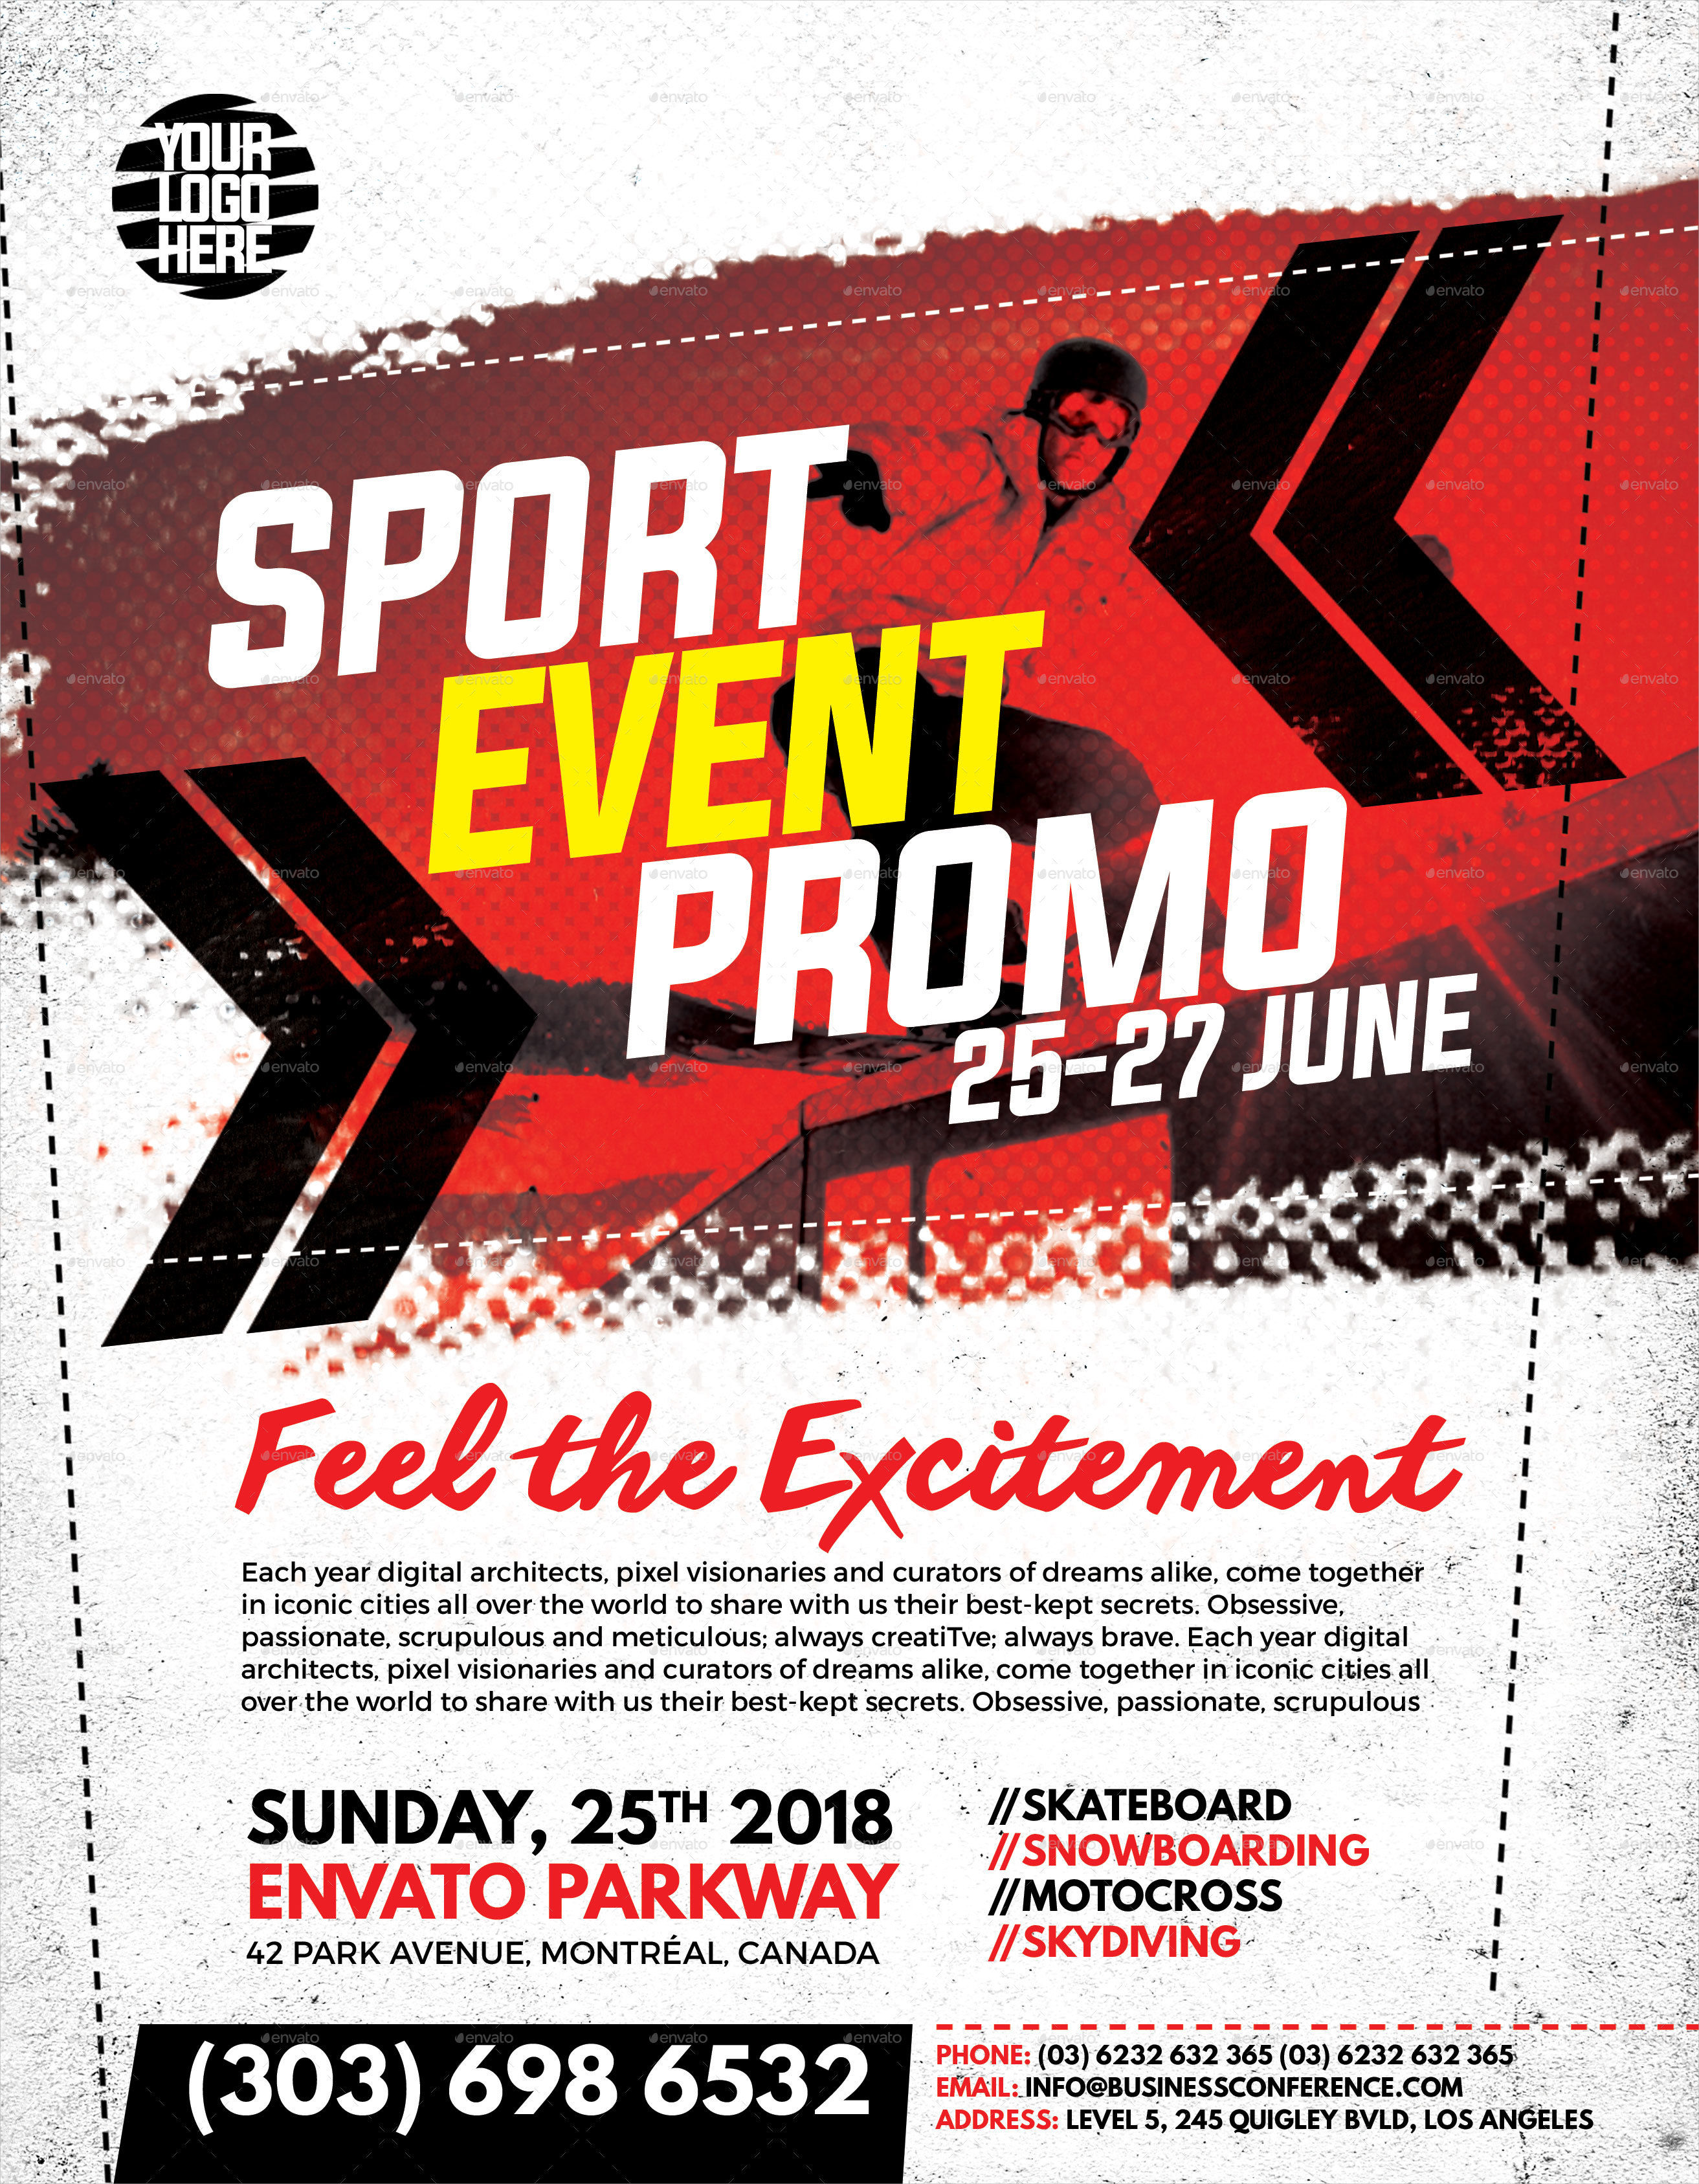 Sports Event Promo Flyer